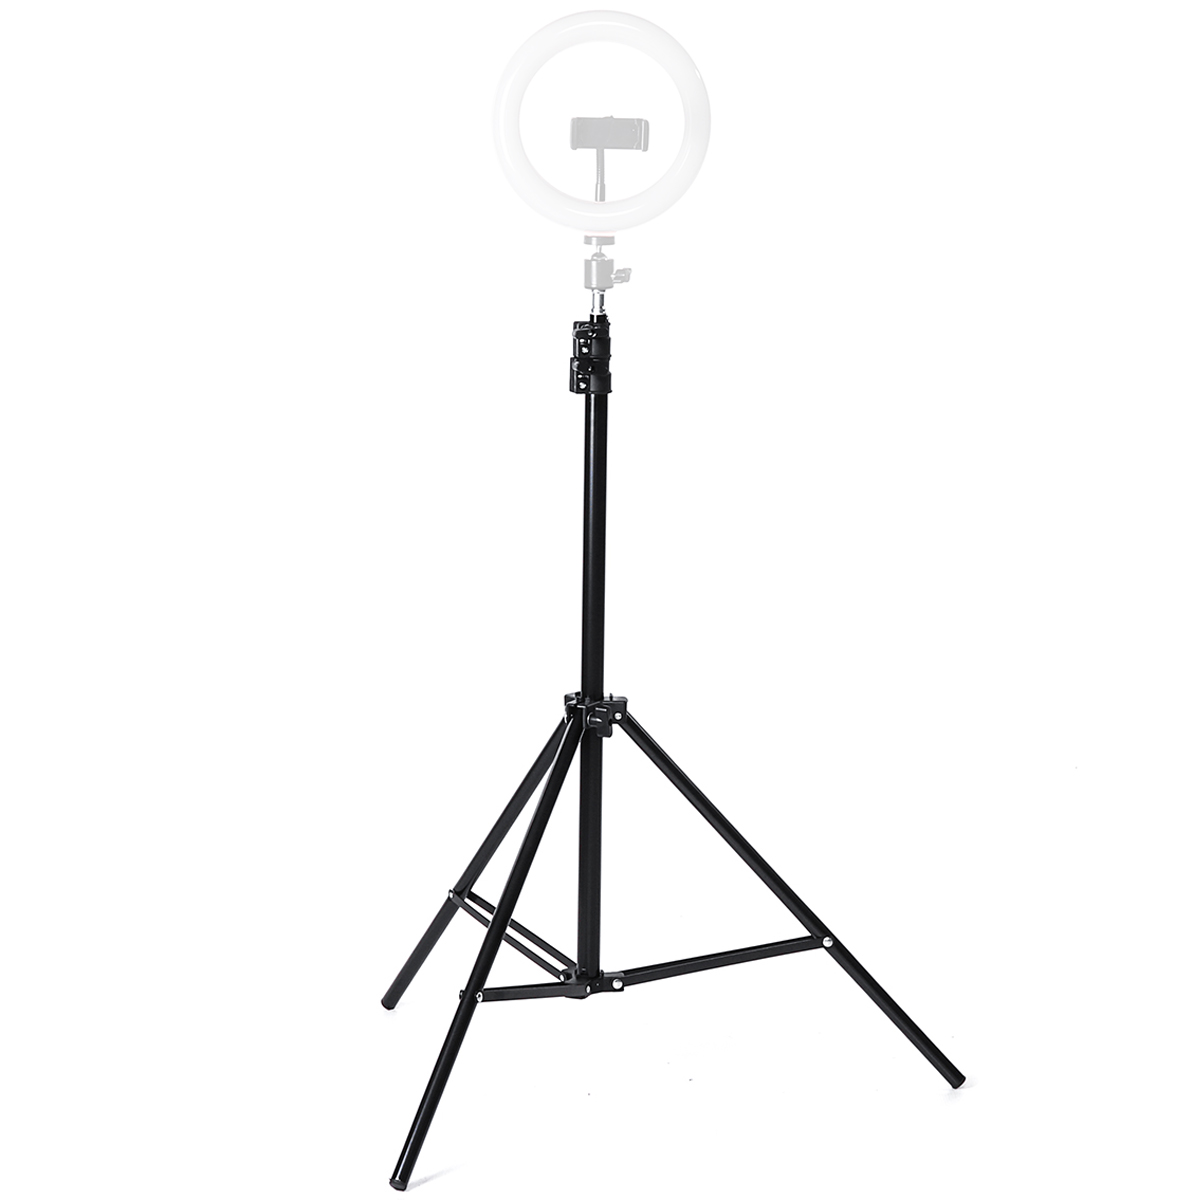 LED-Ring-Light-Tripod-Stand-Studio-Photo-Video-Tripod-Lighting-Stand-for-Youtube-Mobile-Phone-Live-S-1697976